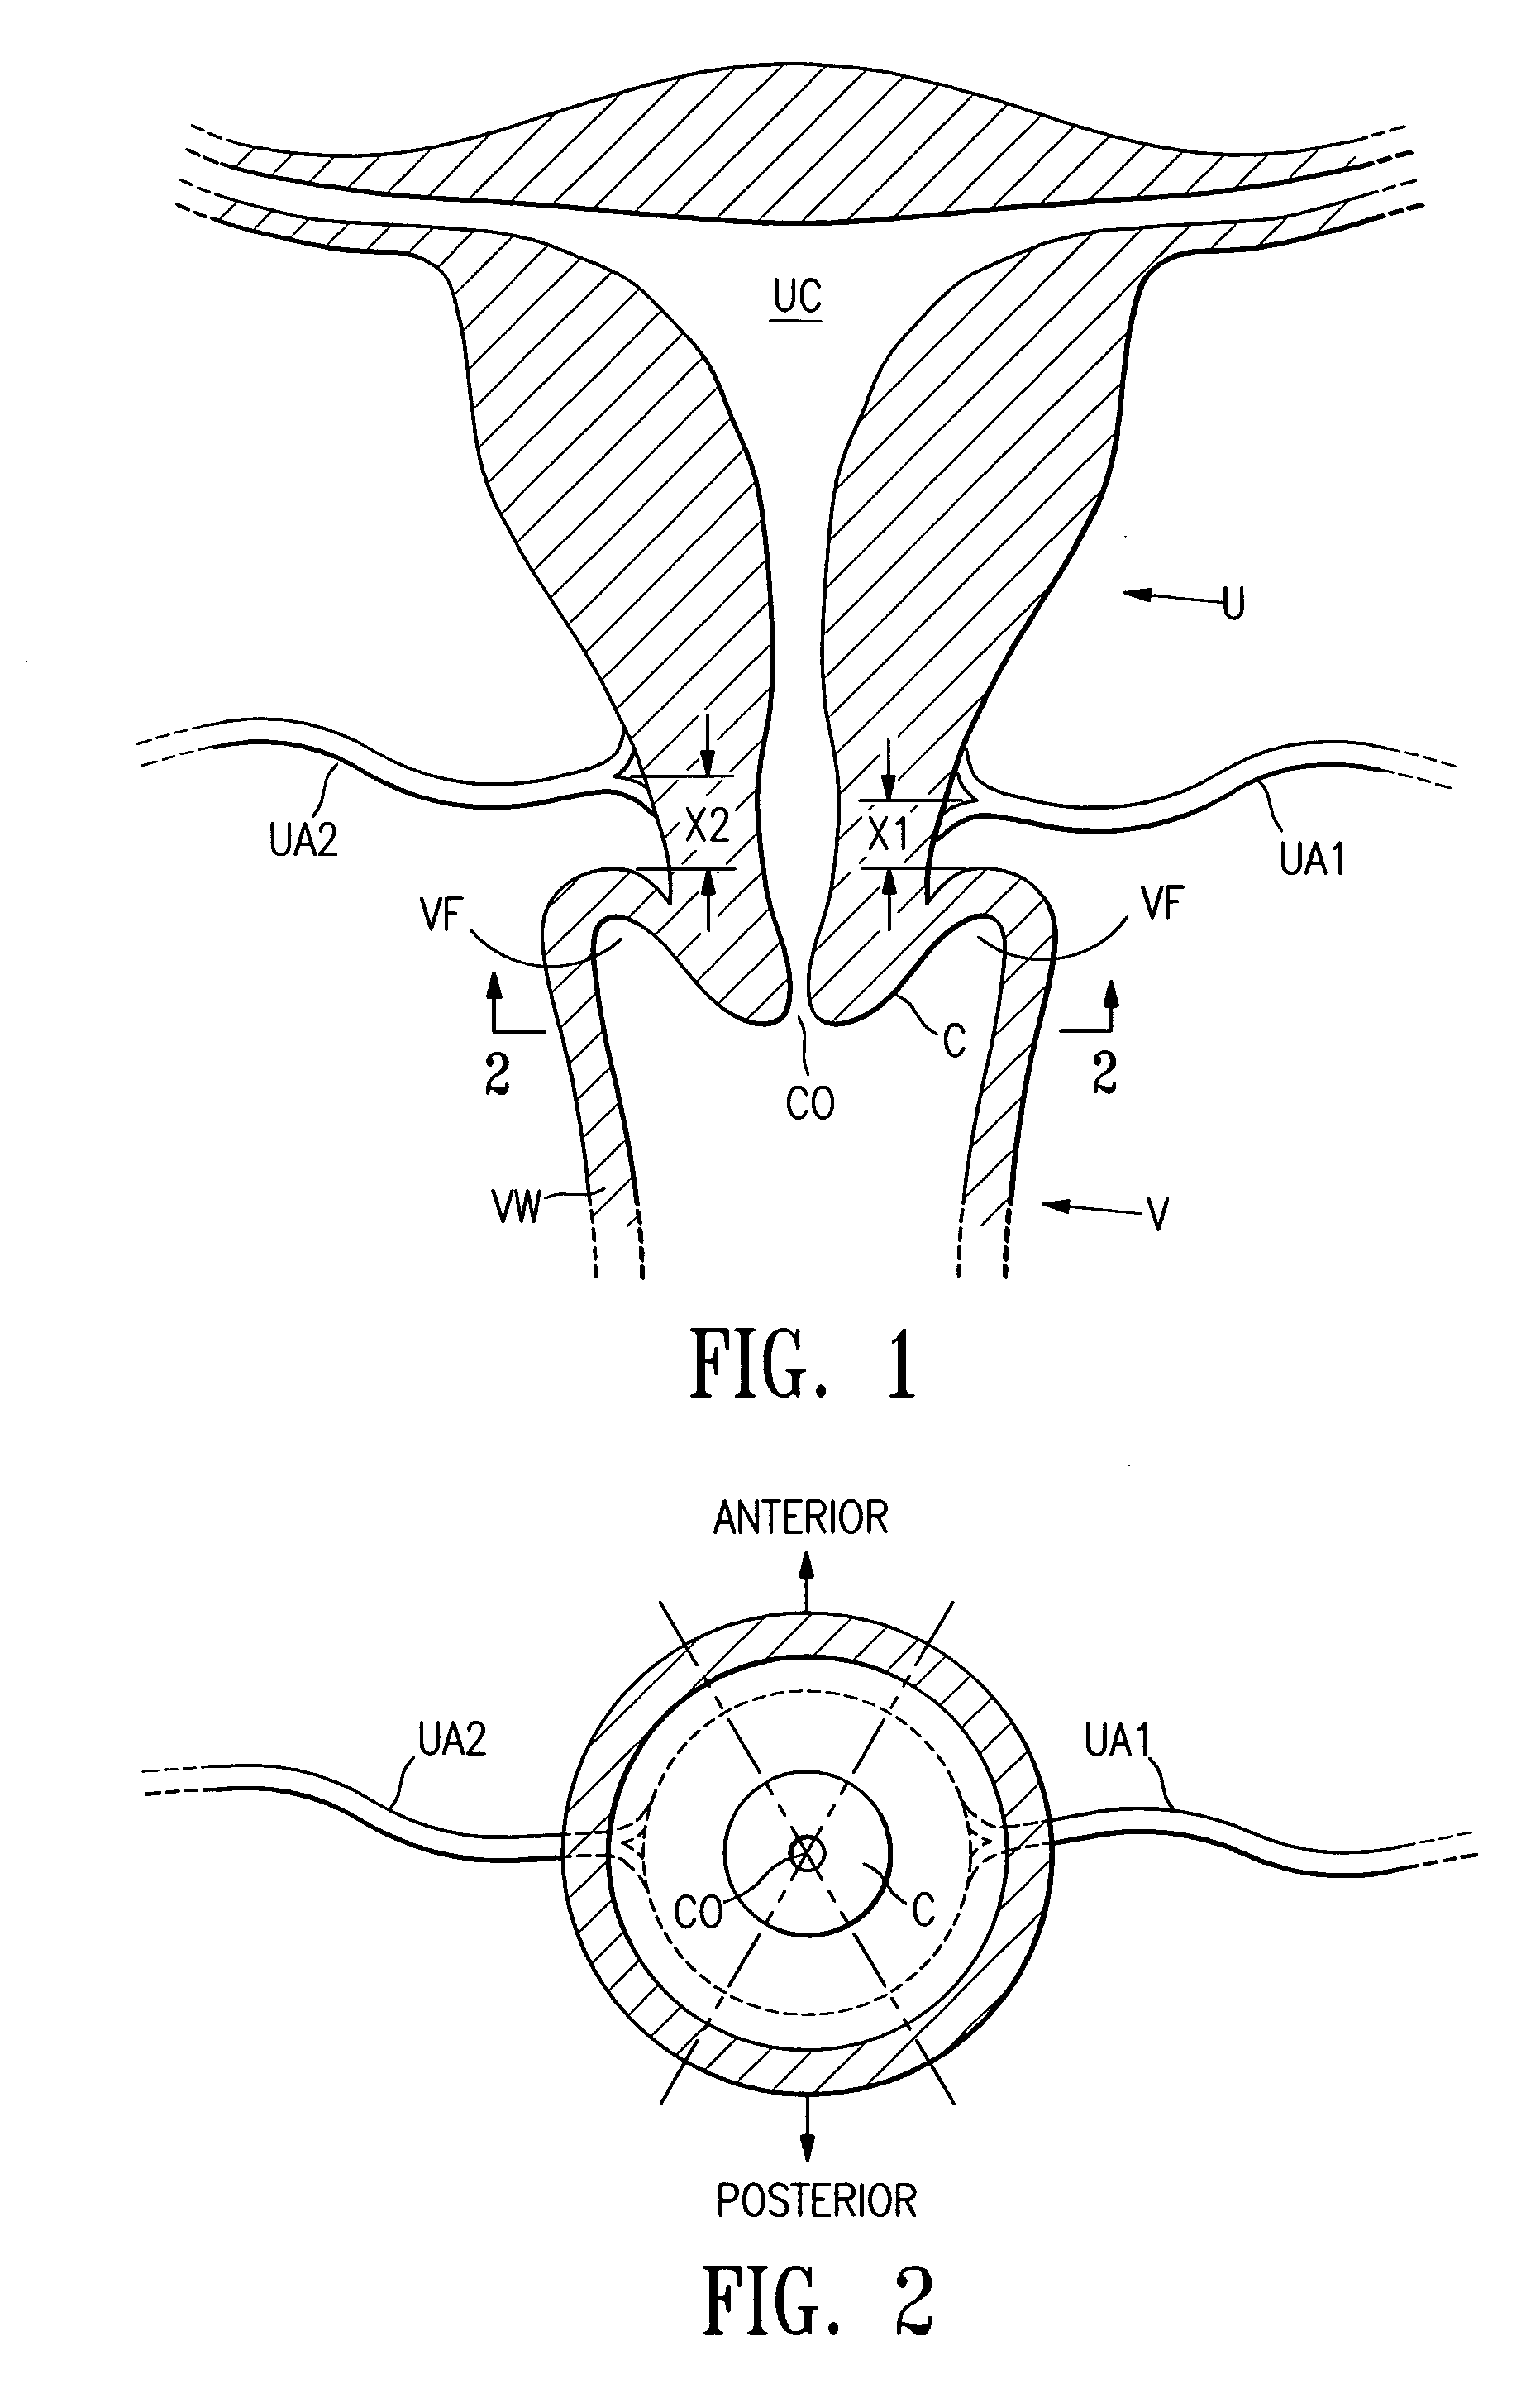 Multi-axial uterine artery identification, characterization, and occlusion pivoting devices and methods